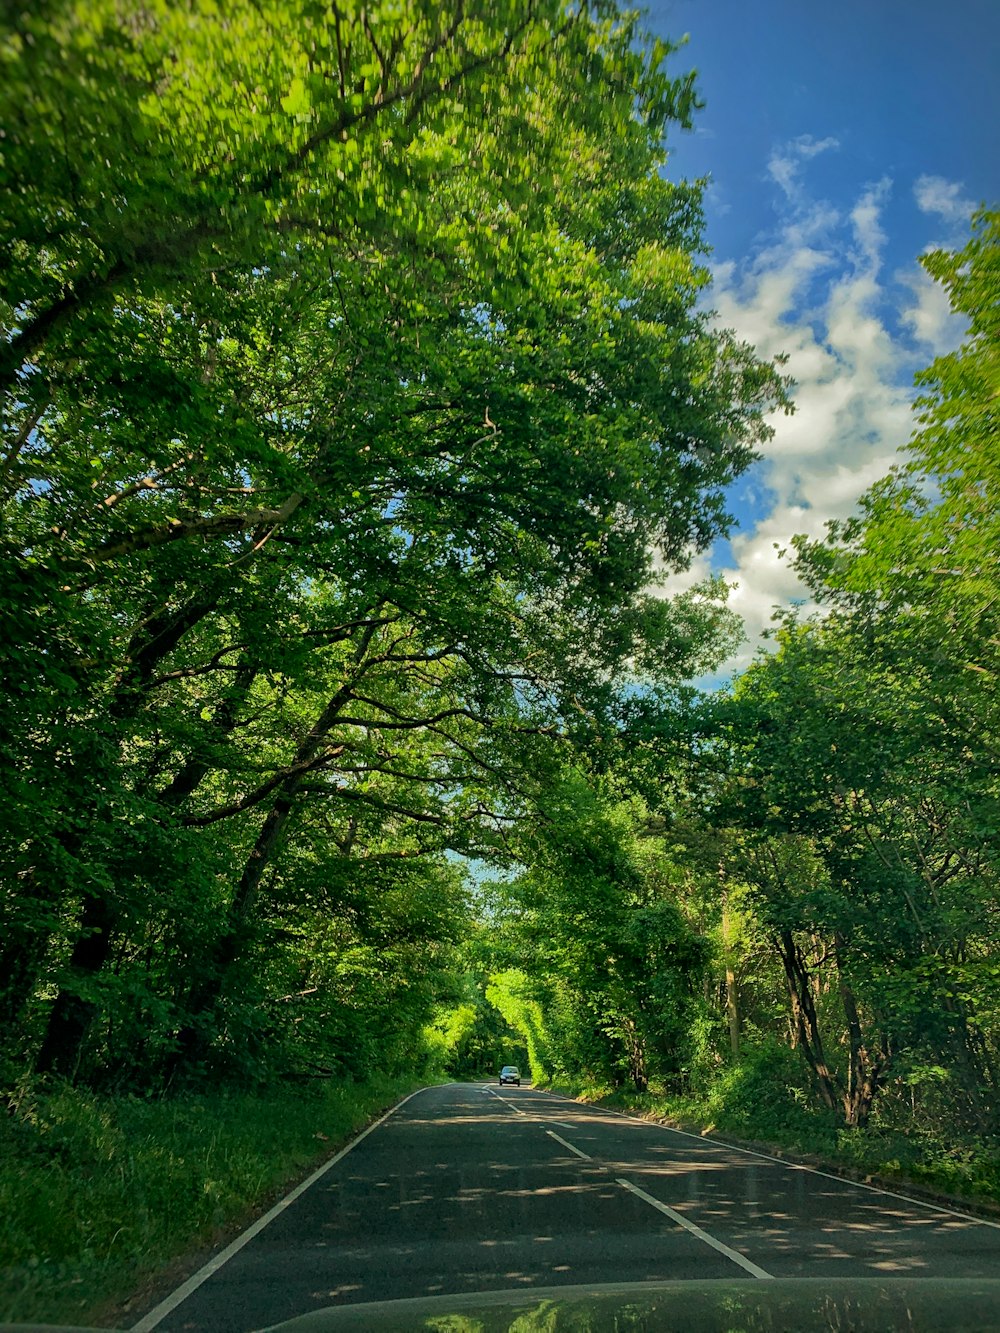 green trees beside road under blue sky during daytime